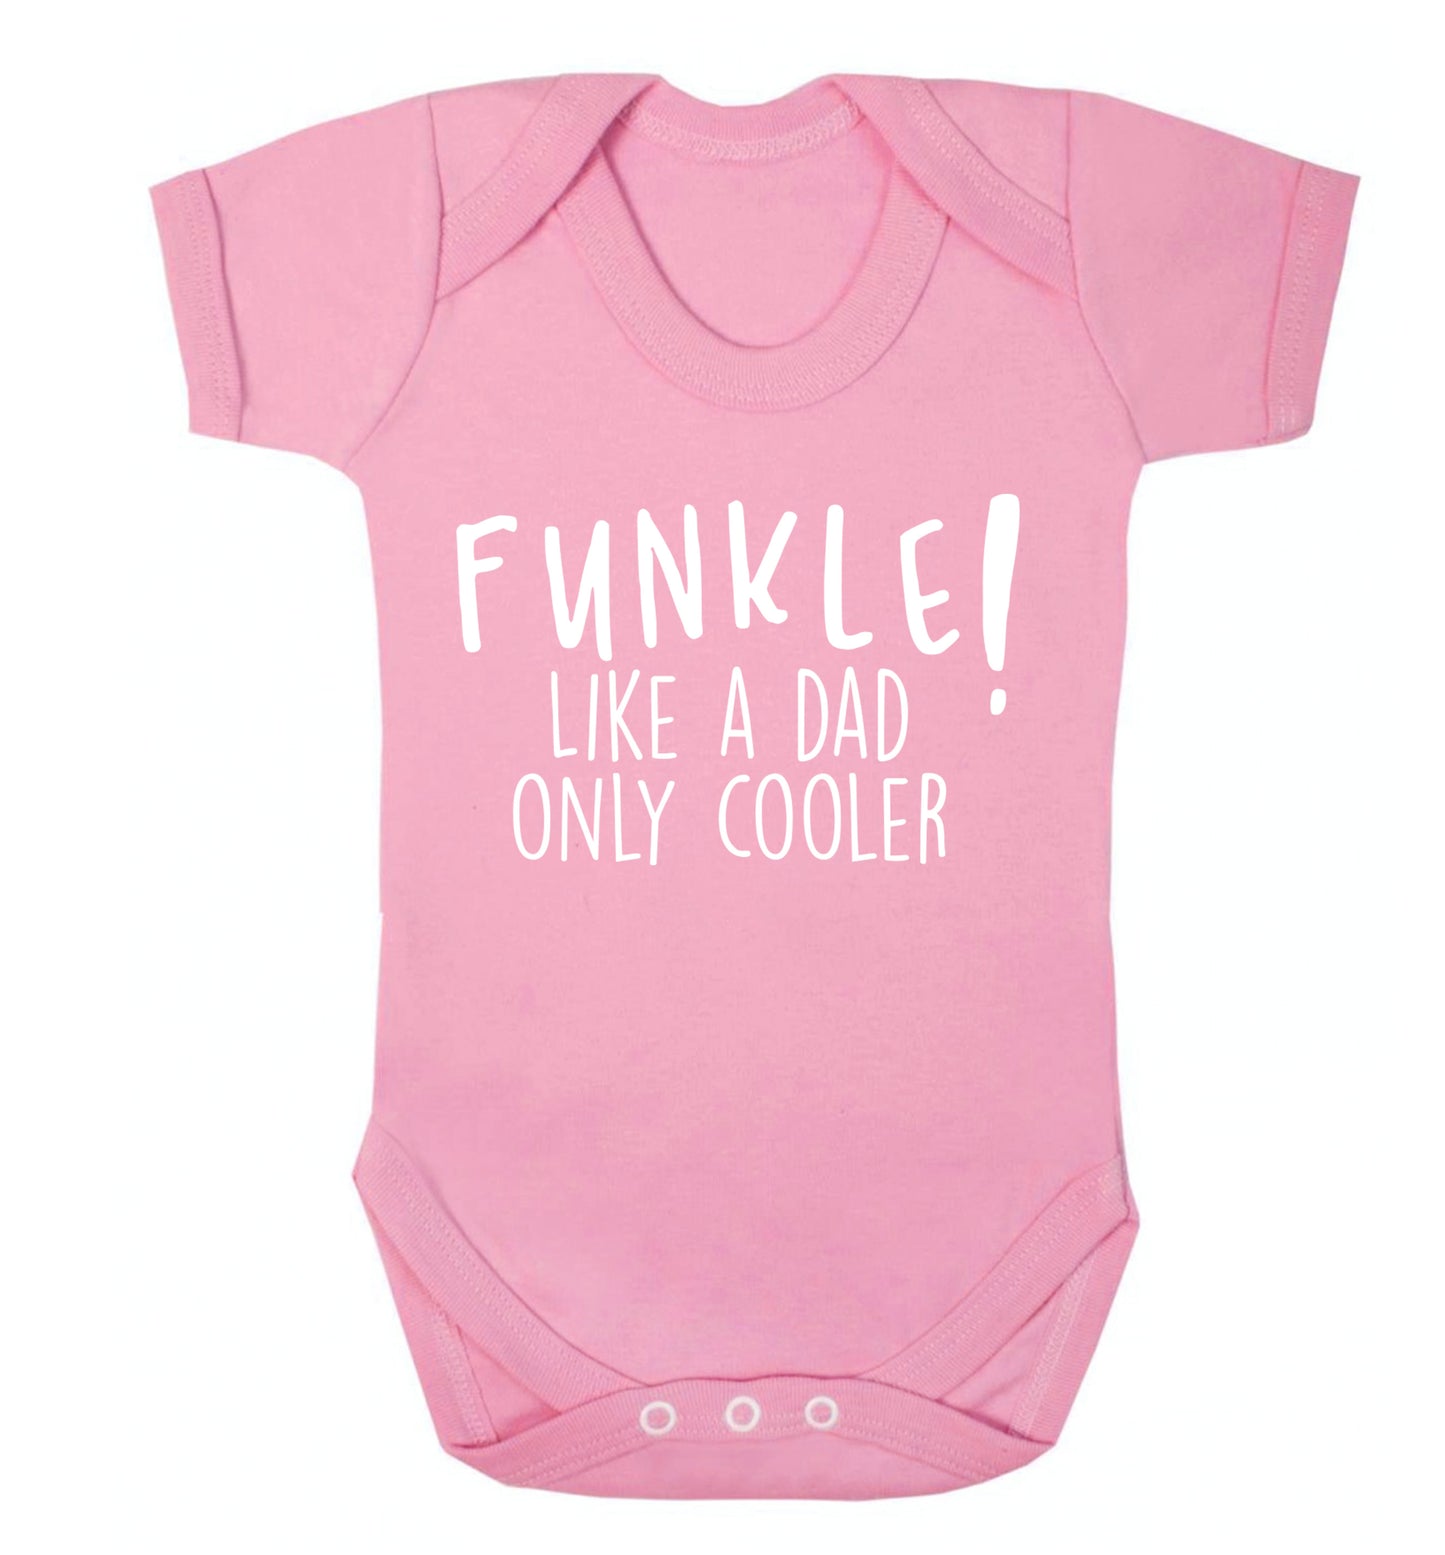 Funkle Like a Dad Only Cooler Baby Vest pale pink 18-24 months